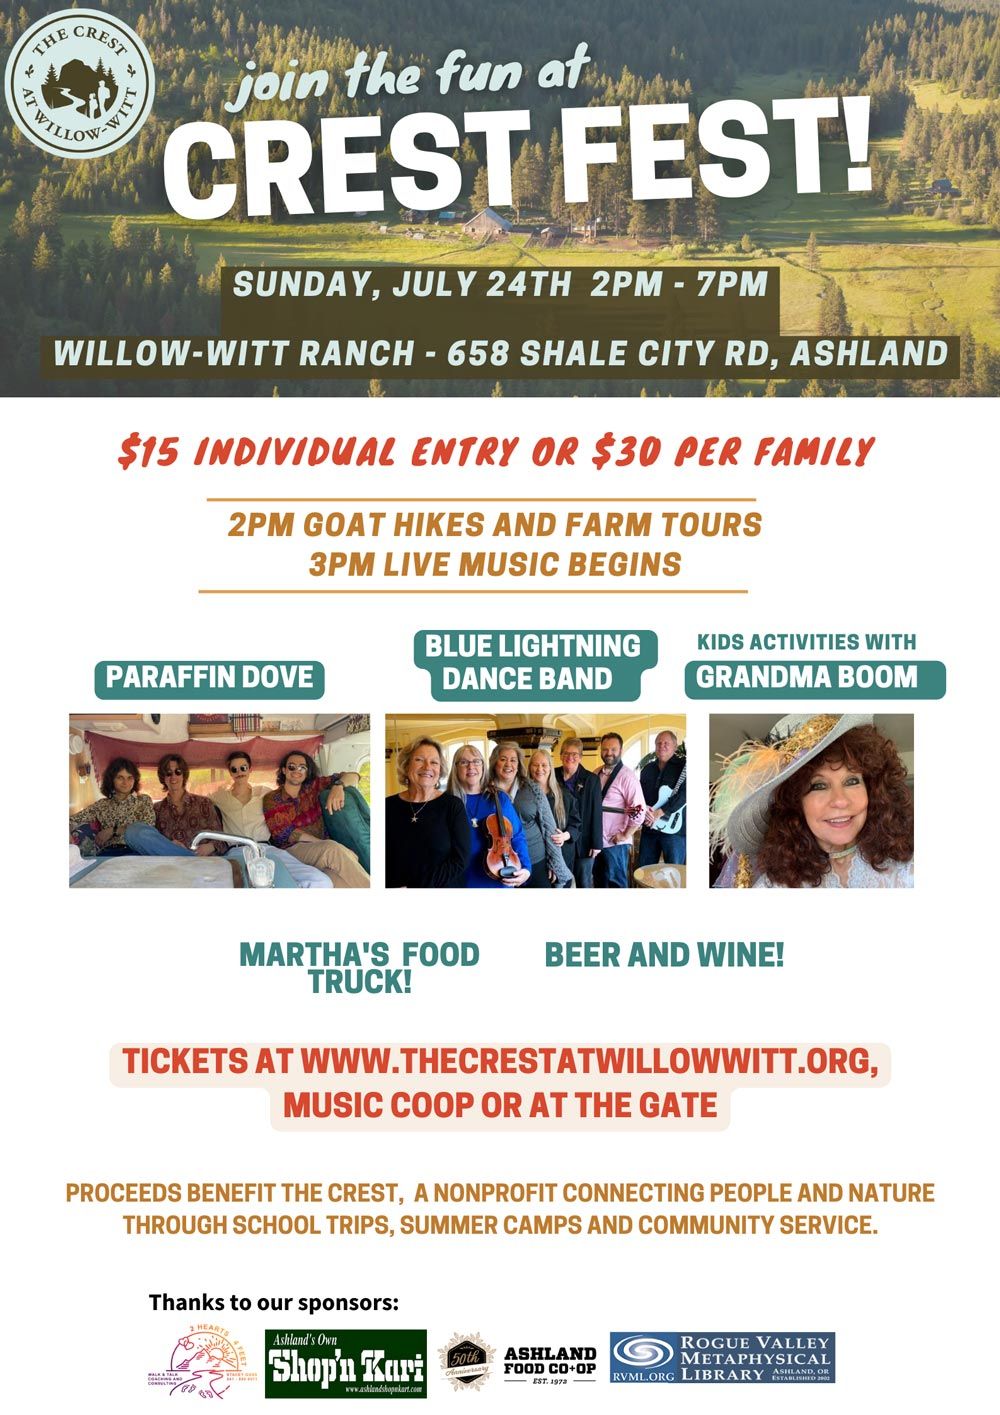 Crest Fest 2022 - Sunday, July 24th, 2-7pm at Willow-Witt Ranch with goat hiking, farm tours, live music, food, beer, wine